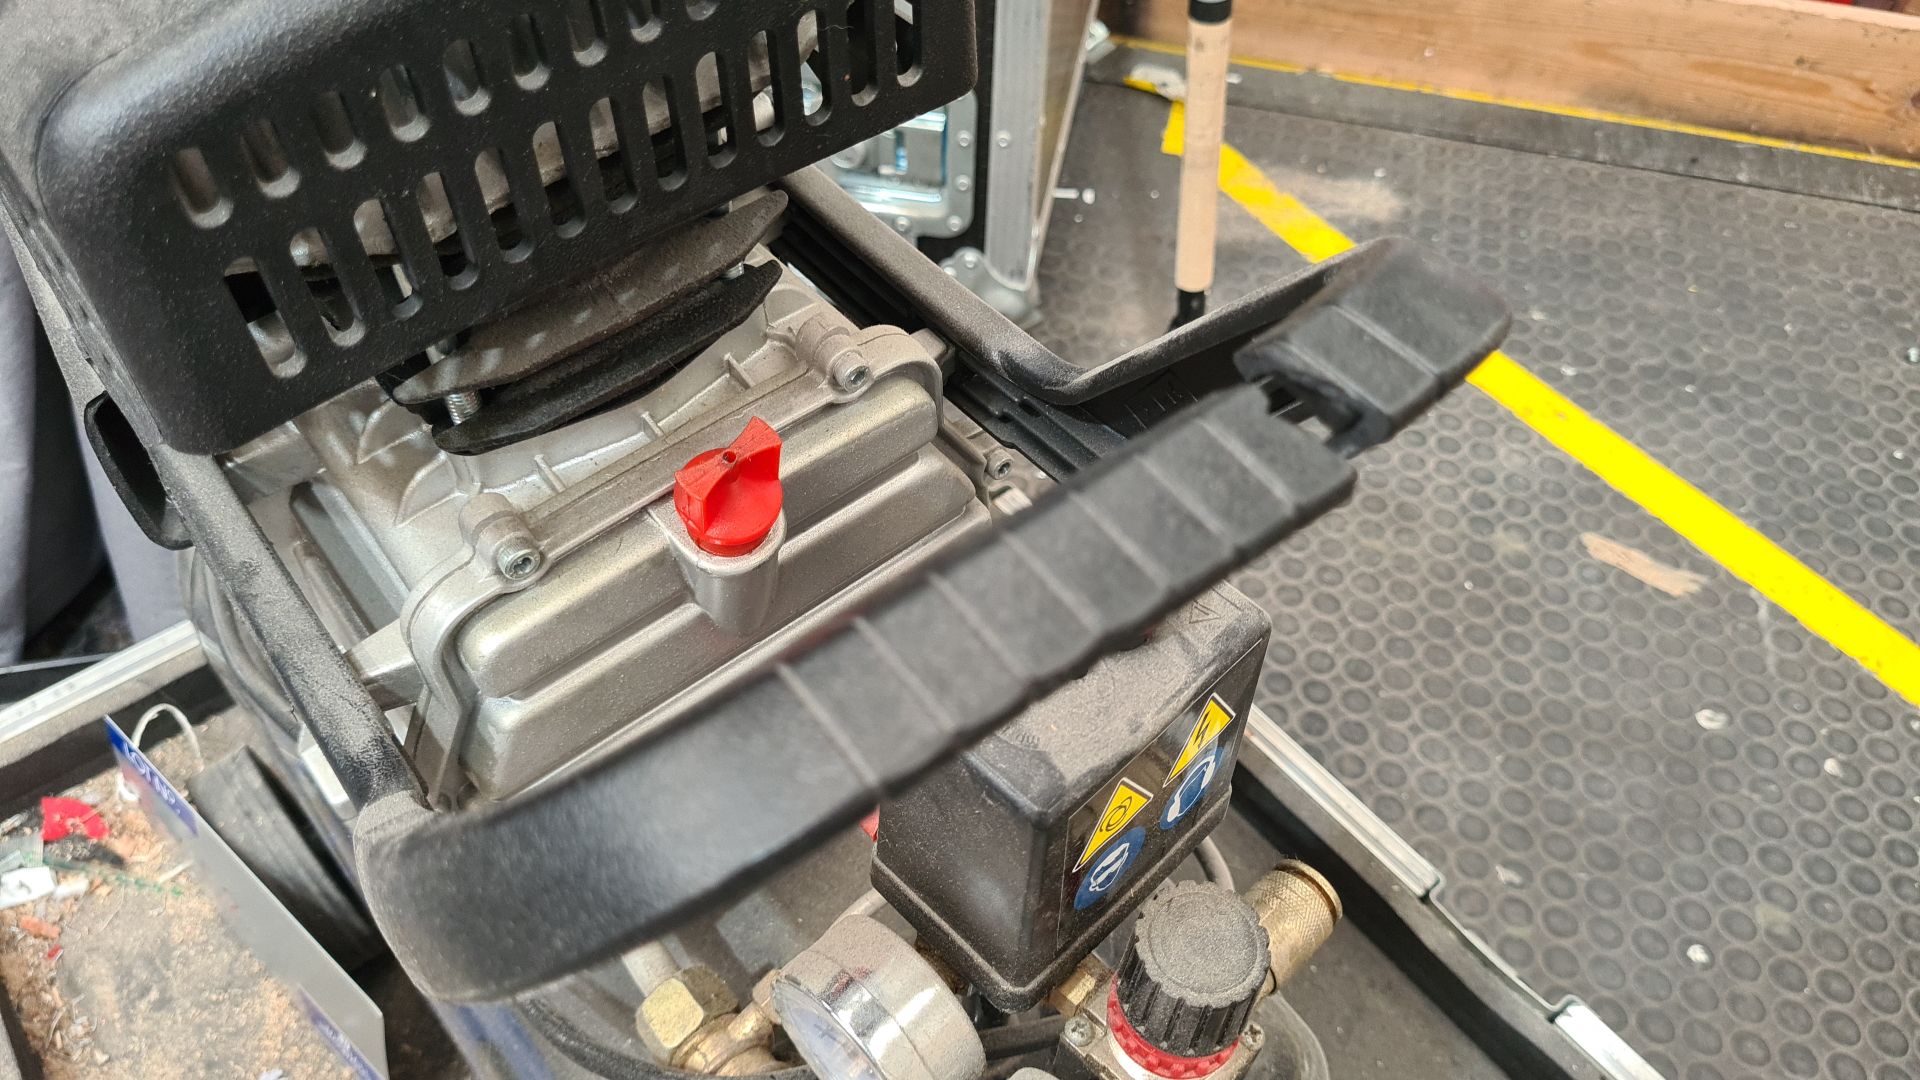 An SGS 24 Litre Direct Drive Portable Air Compressor (damage to plastic handle and body). - Image 2 of 3